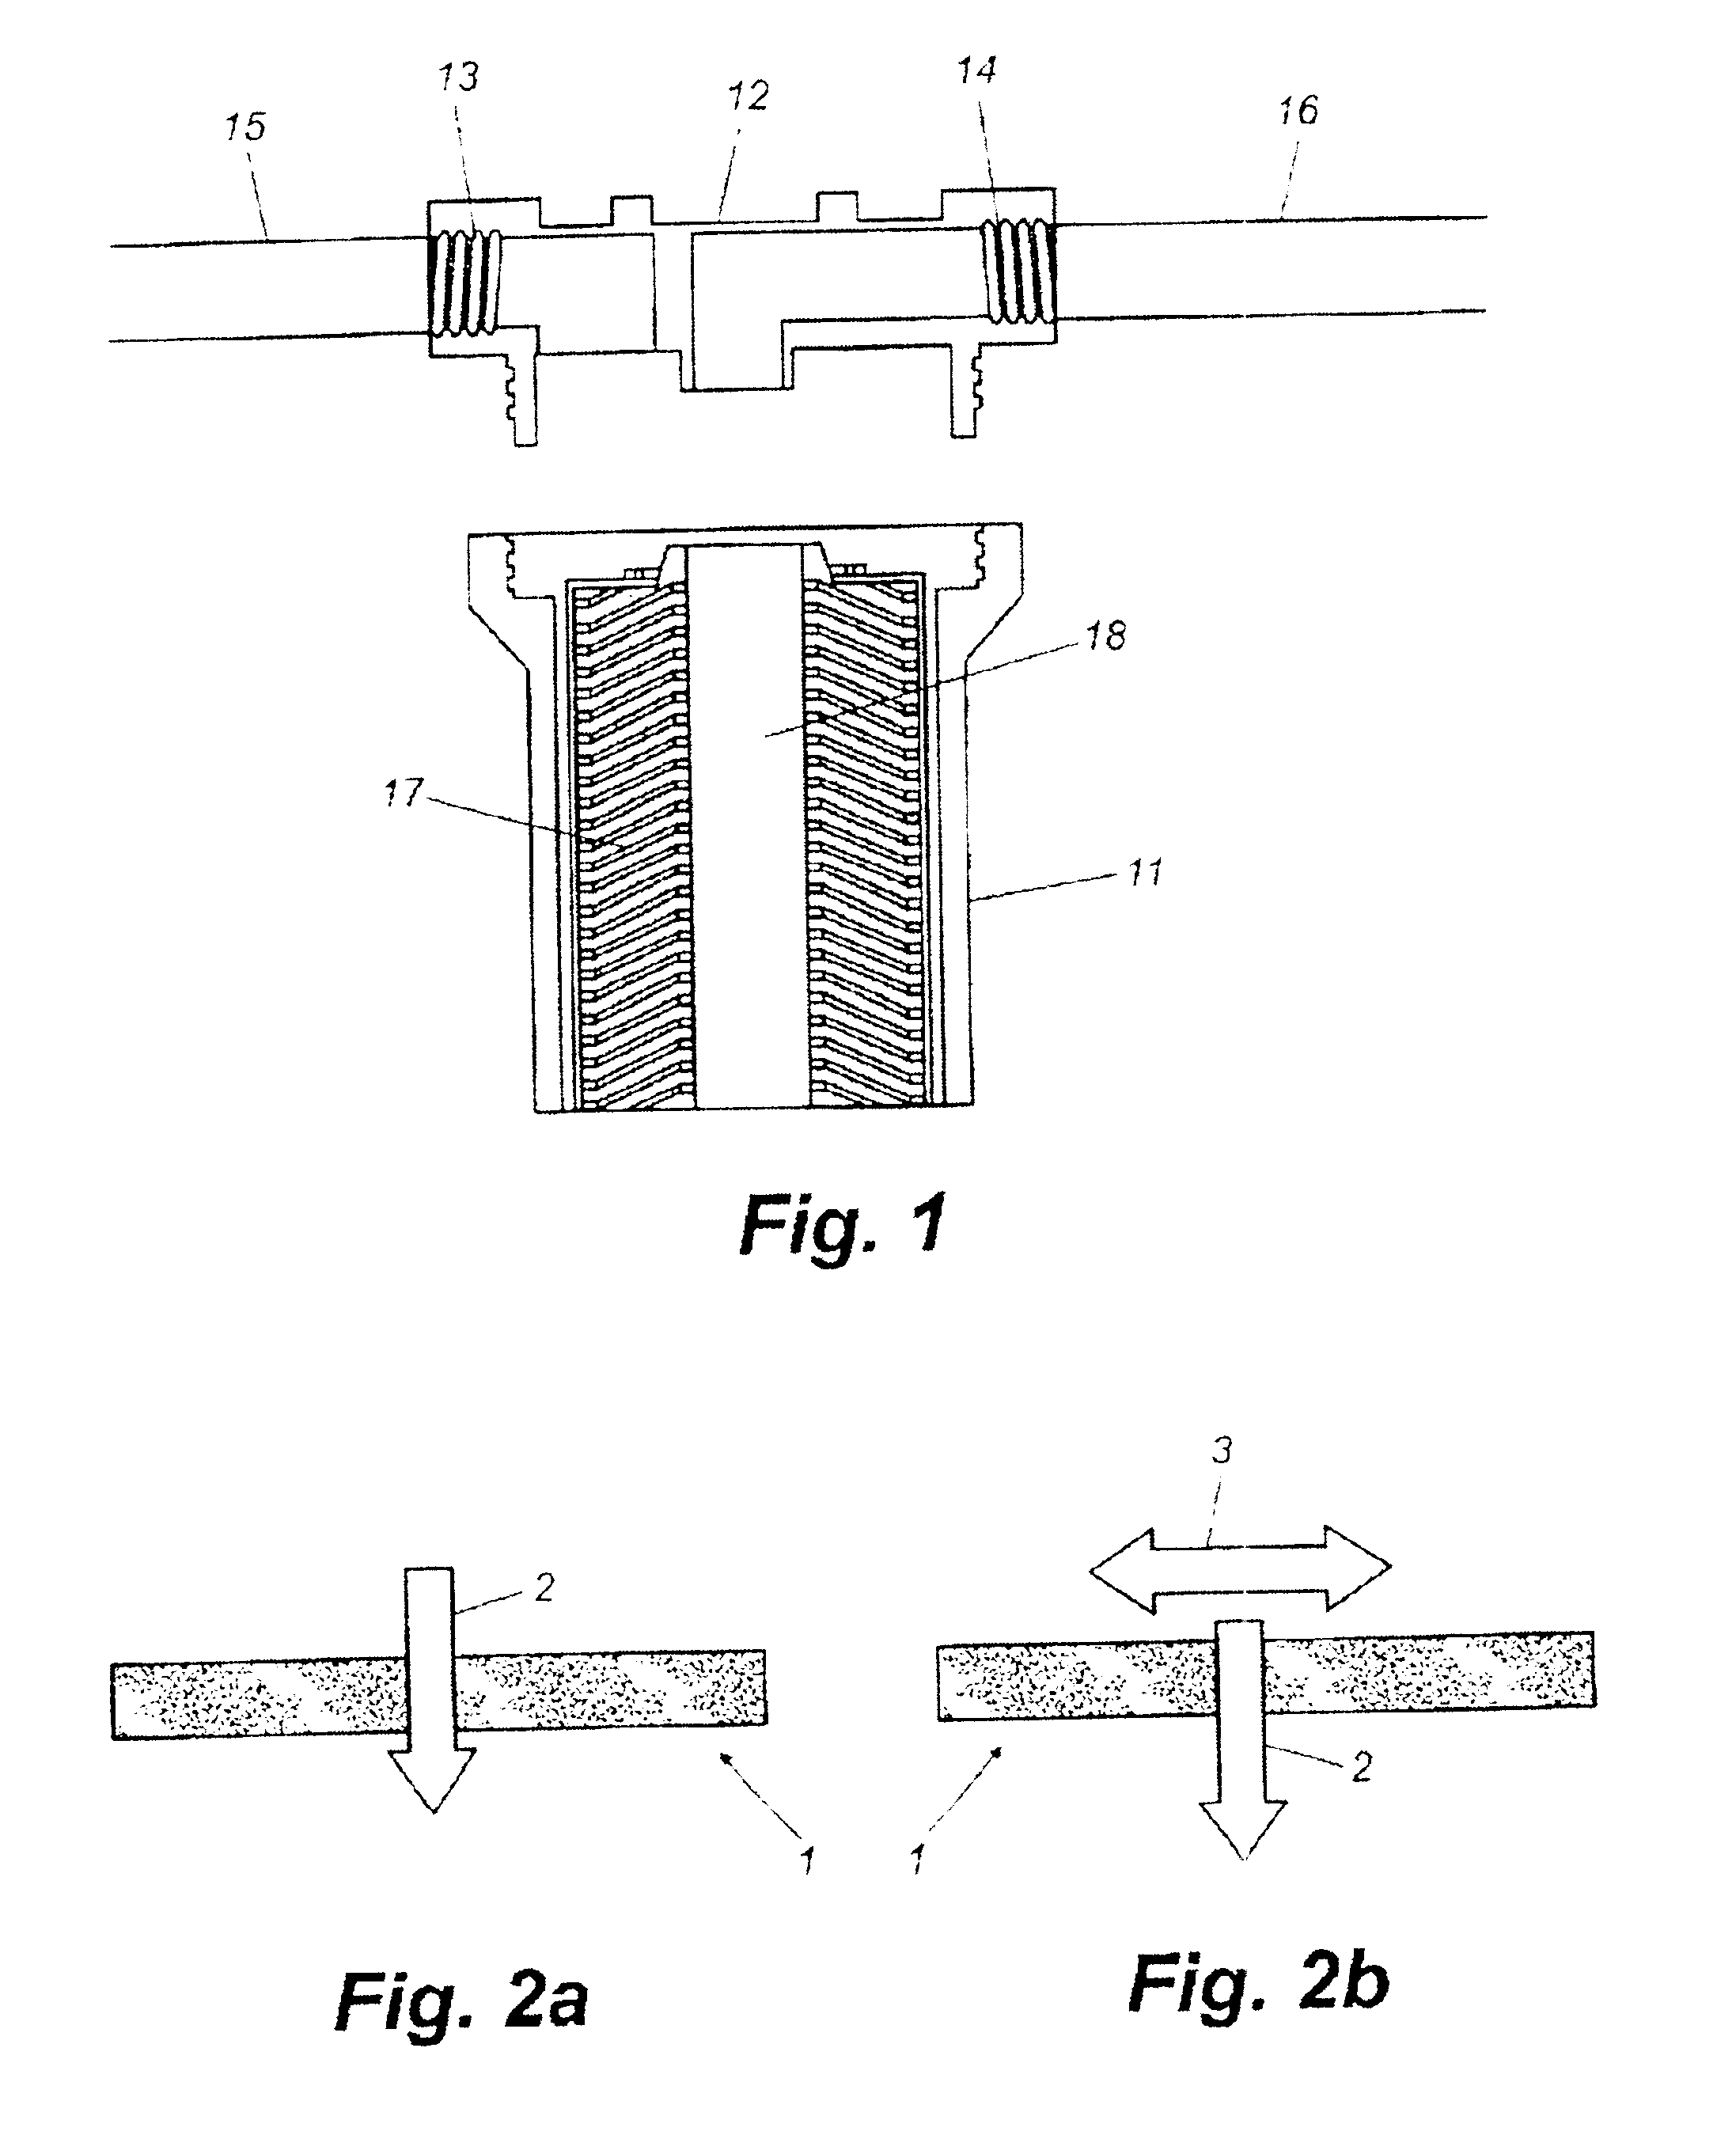 Process for preparing reactive compositions for fluid treatment